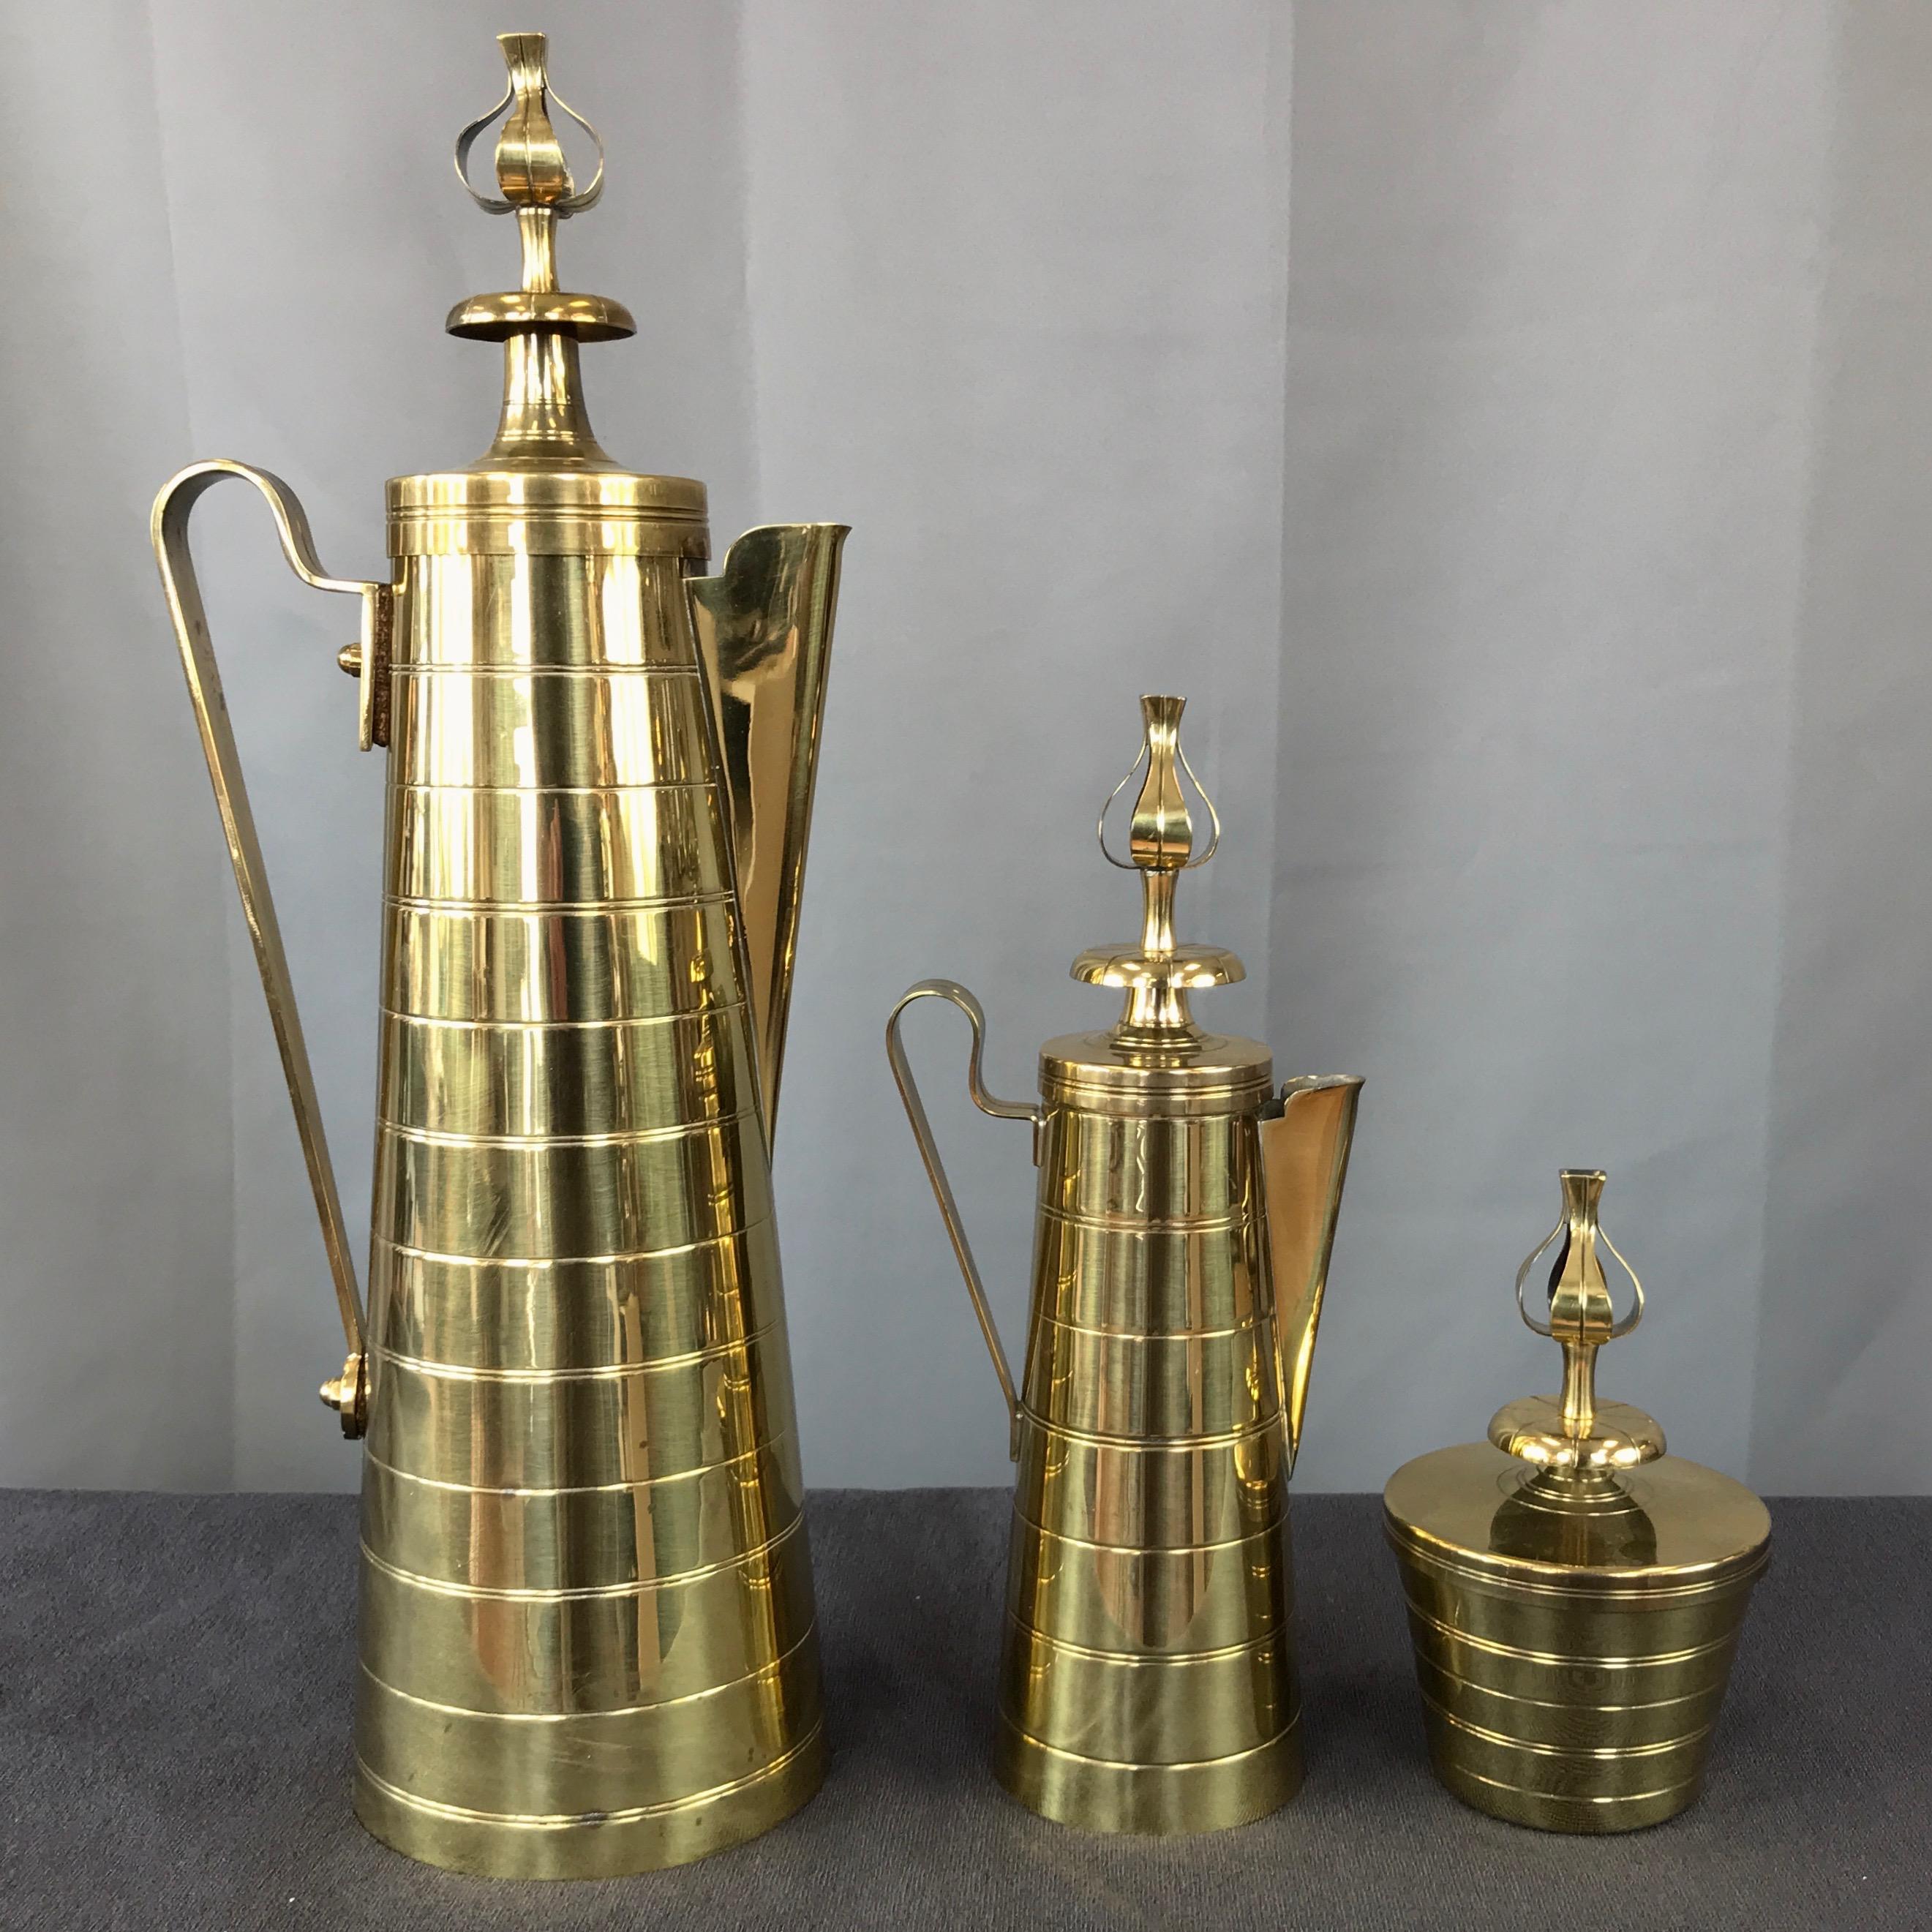 A stunning Hollywood Regency three-piece brass coffee service by Tommi Parzinger for Dorlyn Silversmiths.

Polished solid brass set comprised of a statuesque carafe, matching creamer, and generous sugar bowl, all with regal multi-tiered lids. Each